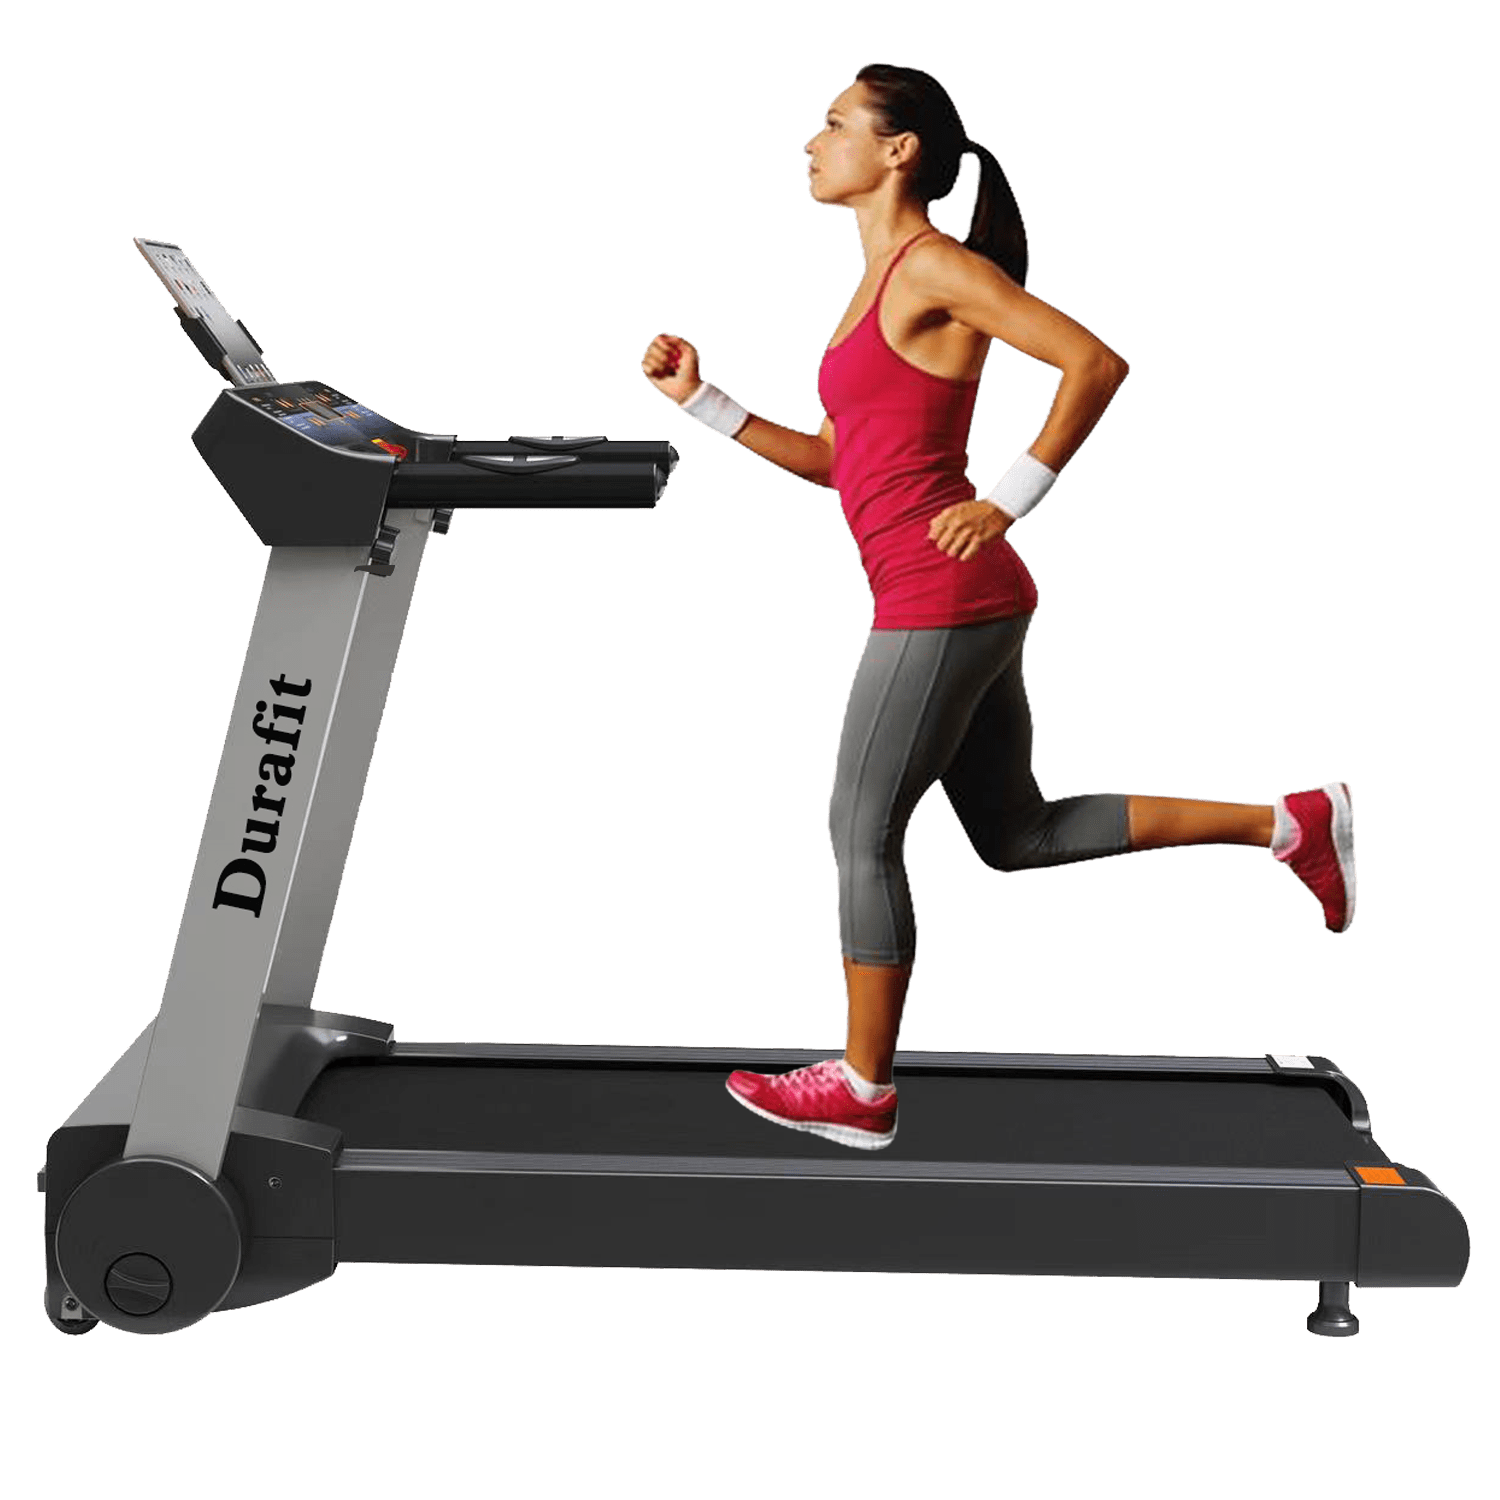 Best affordable treadmill for home use